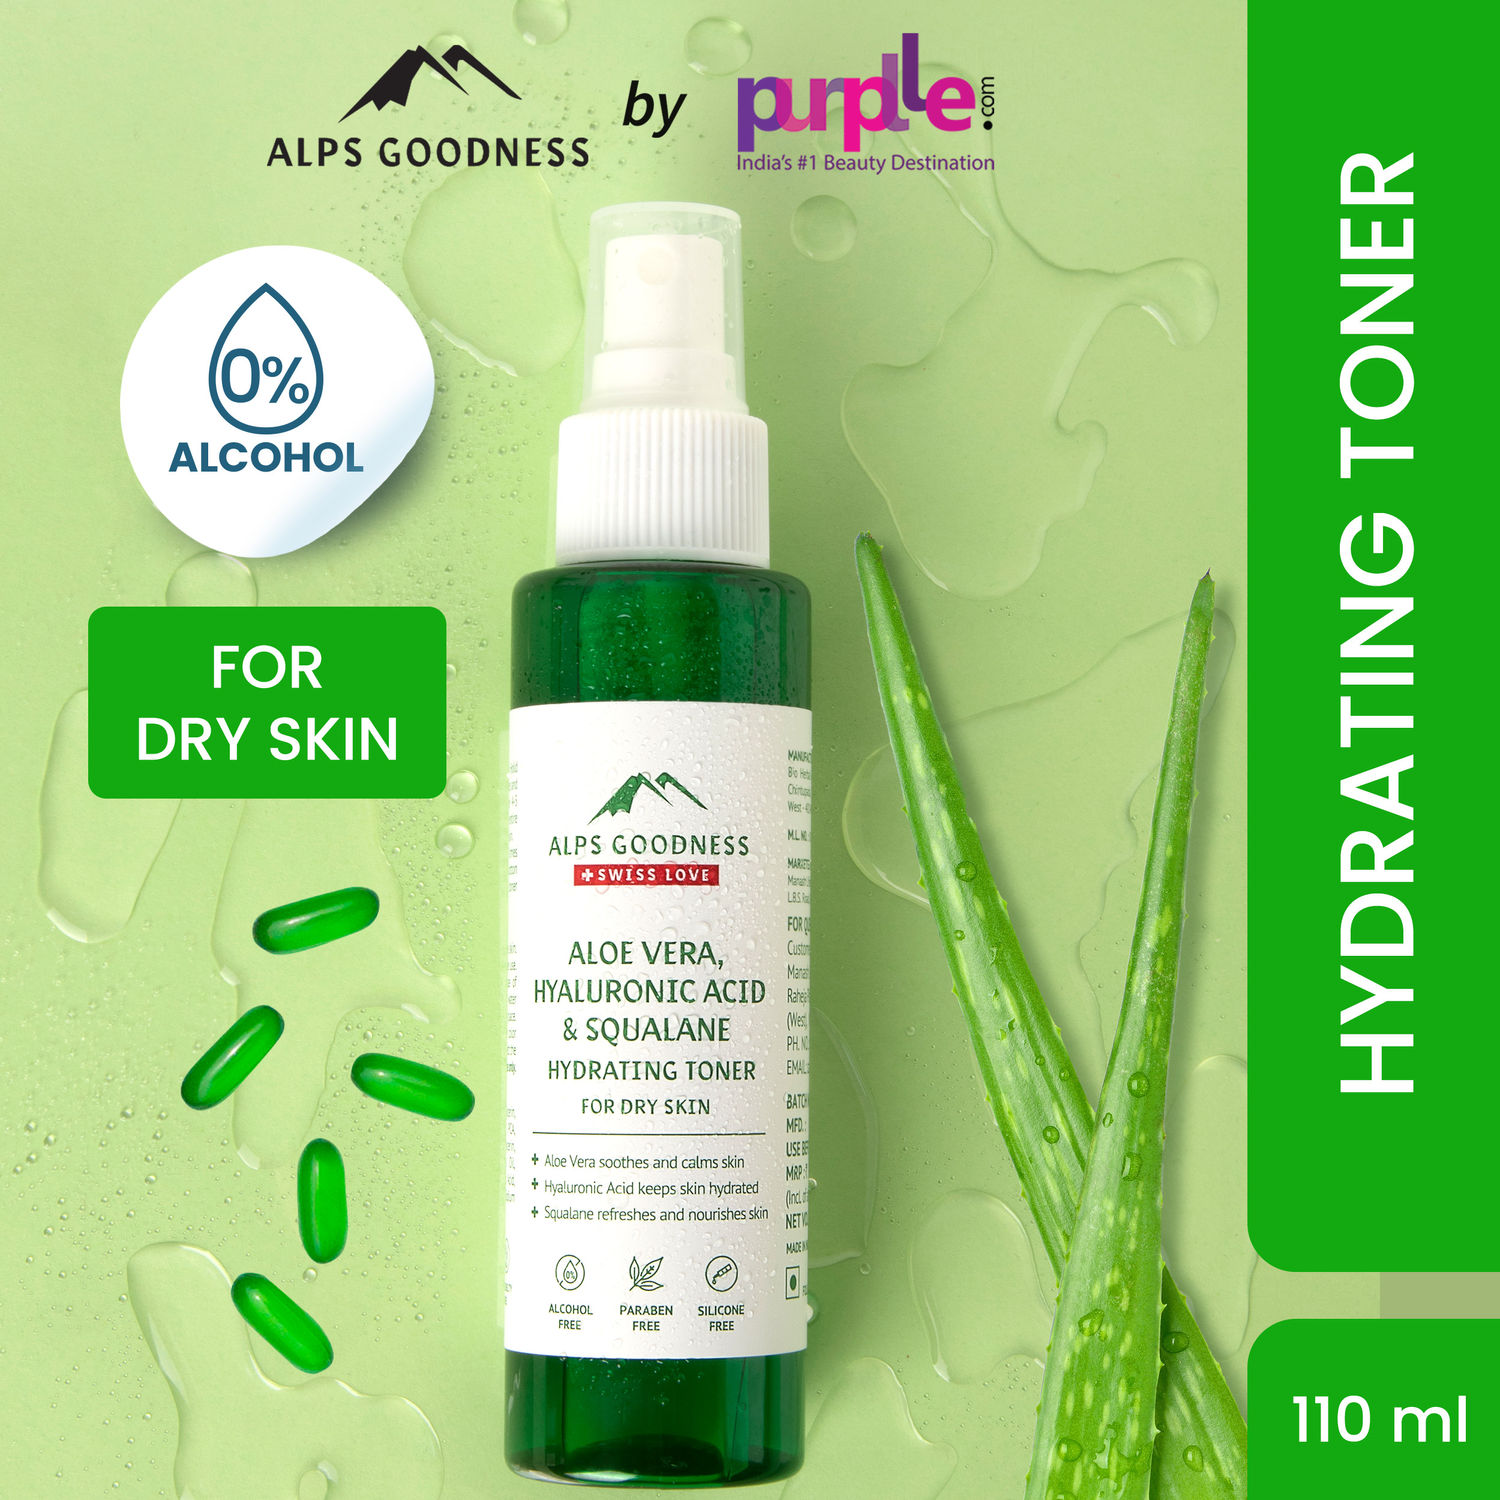 Alps Goodness Aloe Vera, Squalane & Hyaluronic Acid Hydrating Toner for Dry Skin (110ml) | Alcohol free, Paraben Free, Sulphate Free, Silicone Free | Good for pore minimizing/tightening